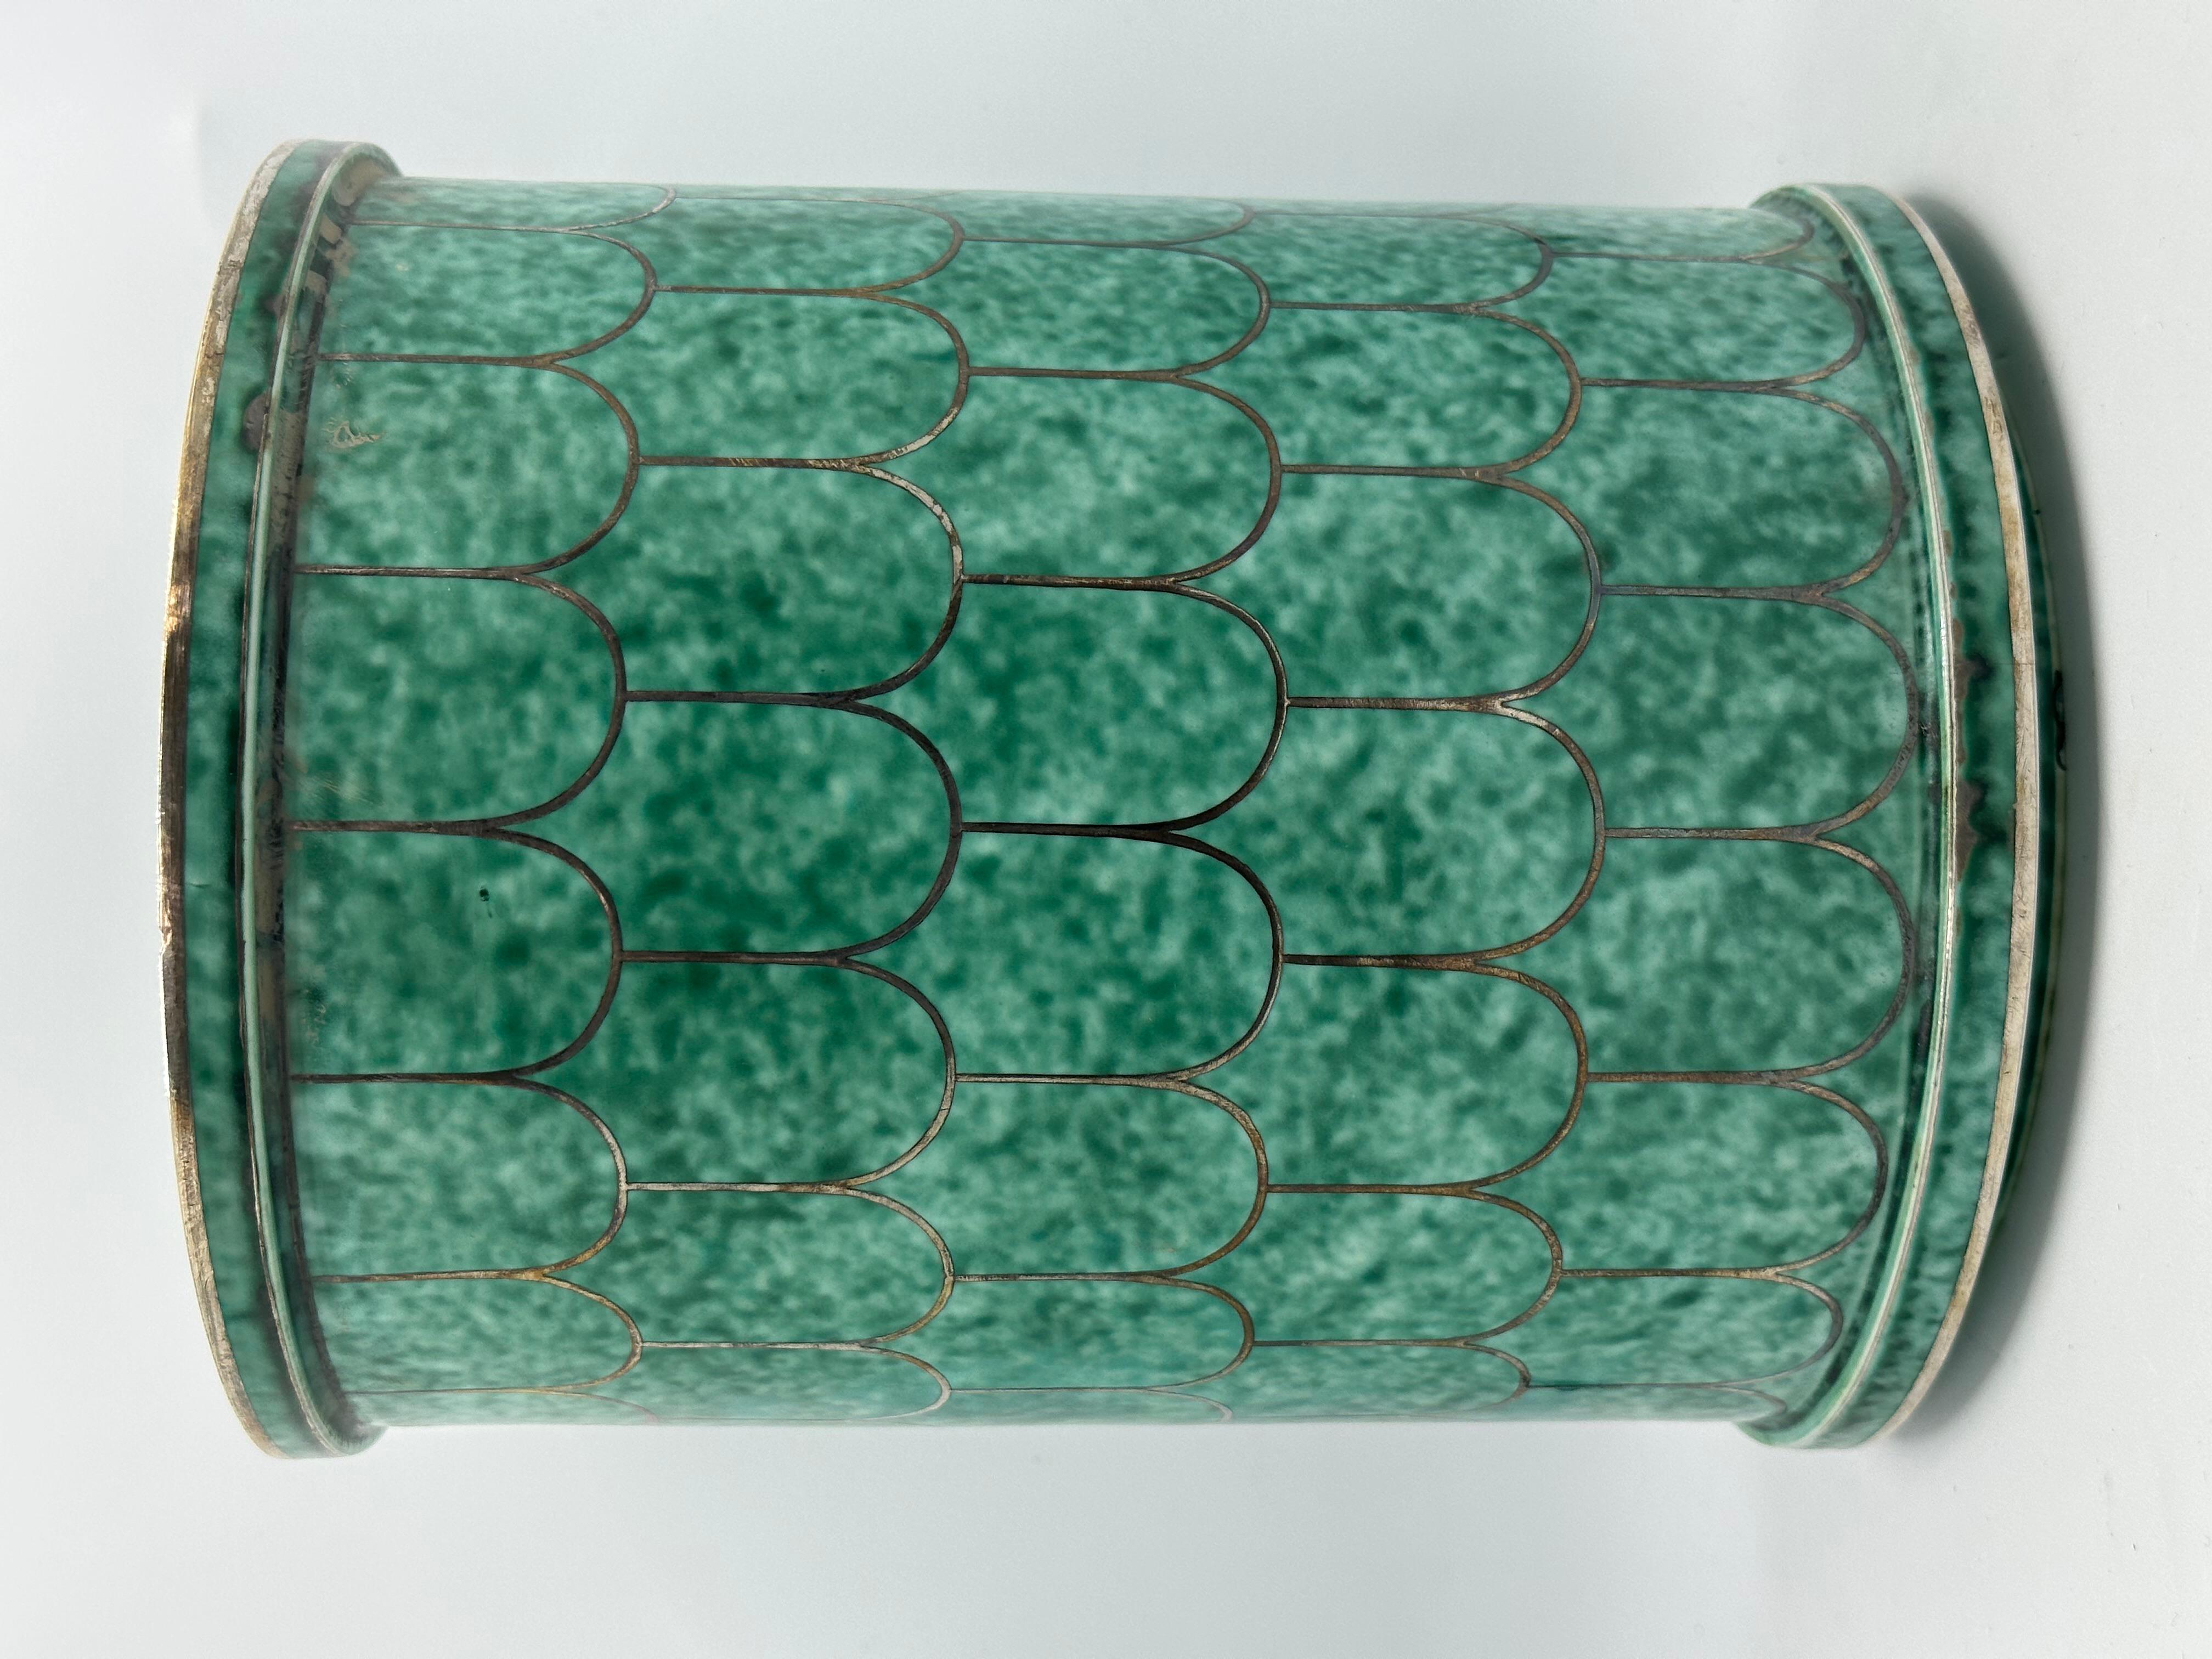 Wilhelm Kage Pot 'Argenta' for Gustavsberg Sweden 1950 Signed 
Rare model that can be a planter, with modern silver decor in shape of utilized sales.
Good condition
The Argenta sandstone collection, now emblematic with its green glaze and silver